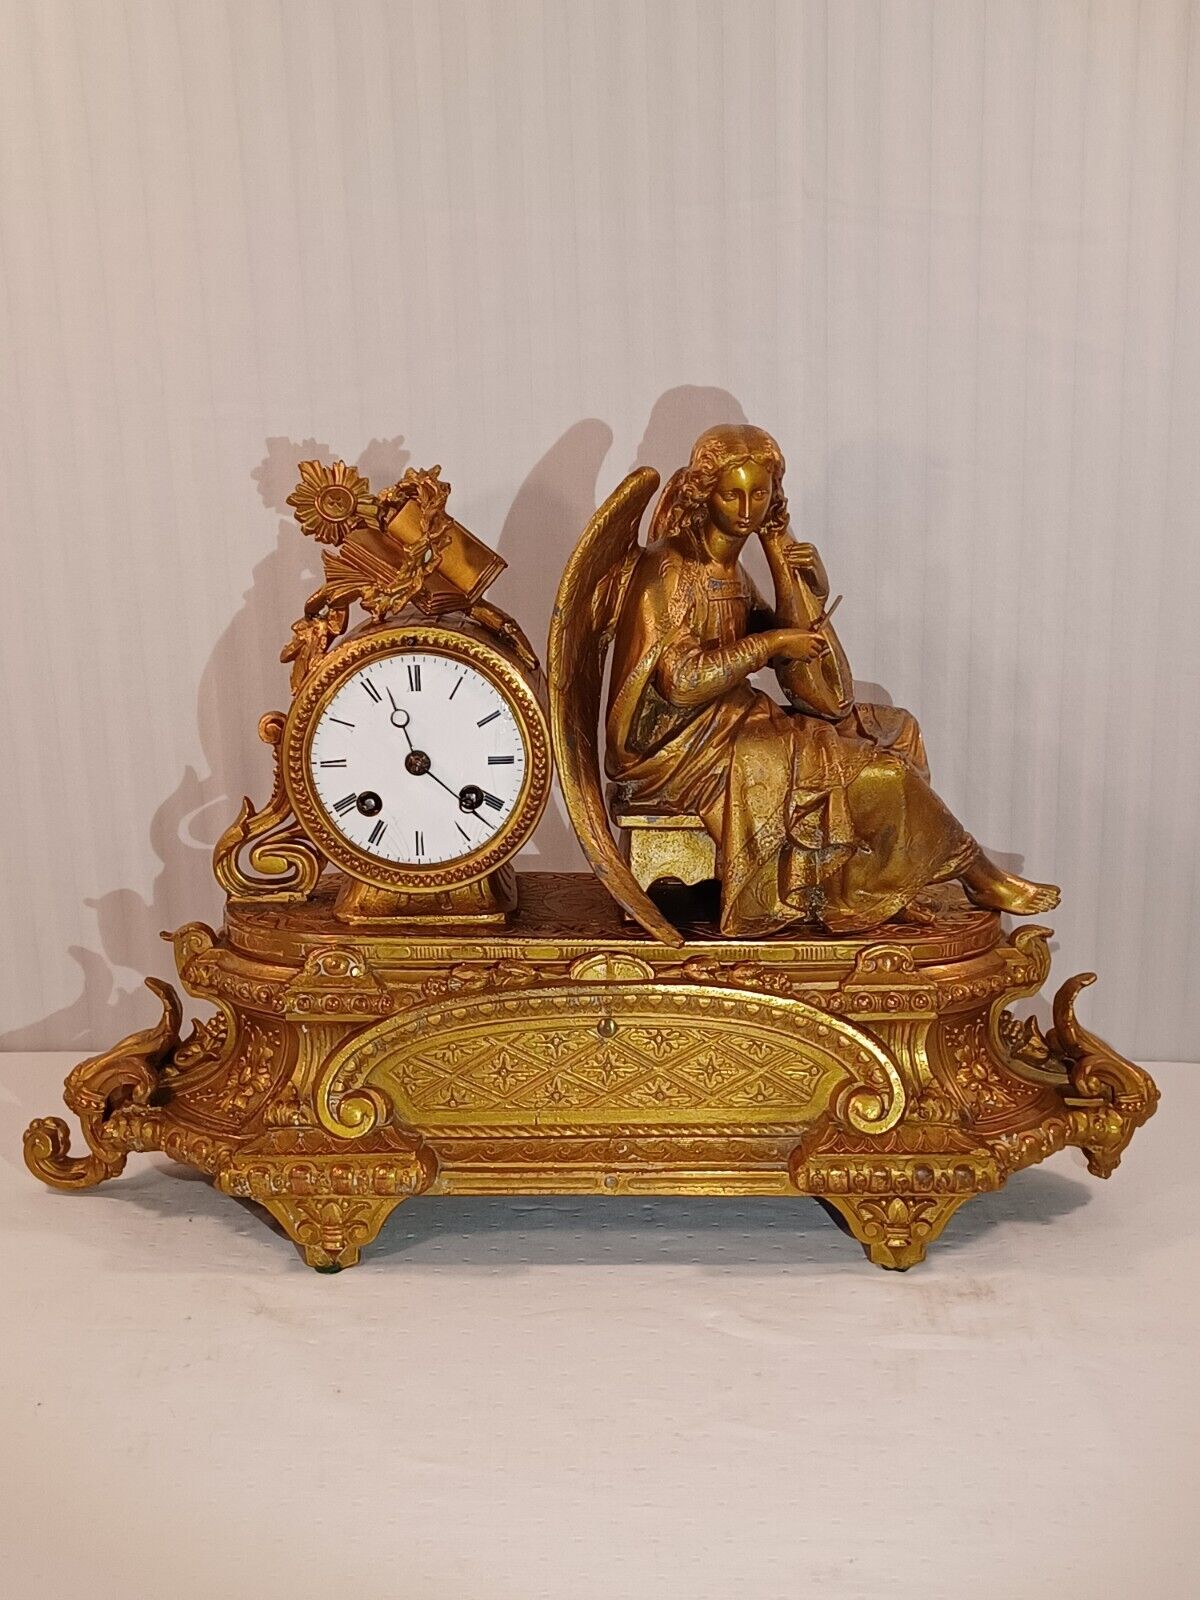 Antique French Victorian Style Gilded Mantle Table Clock by PH Mourney: 1890s